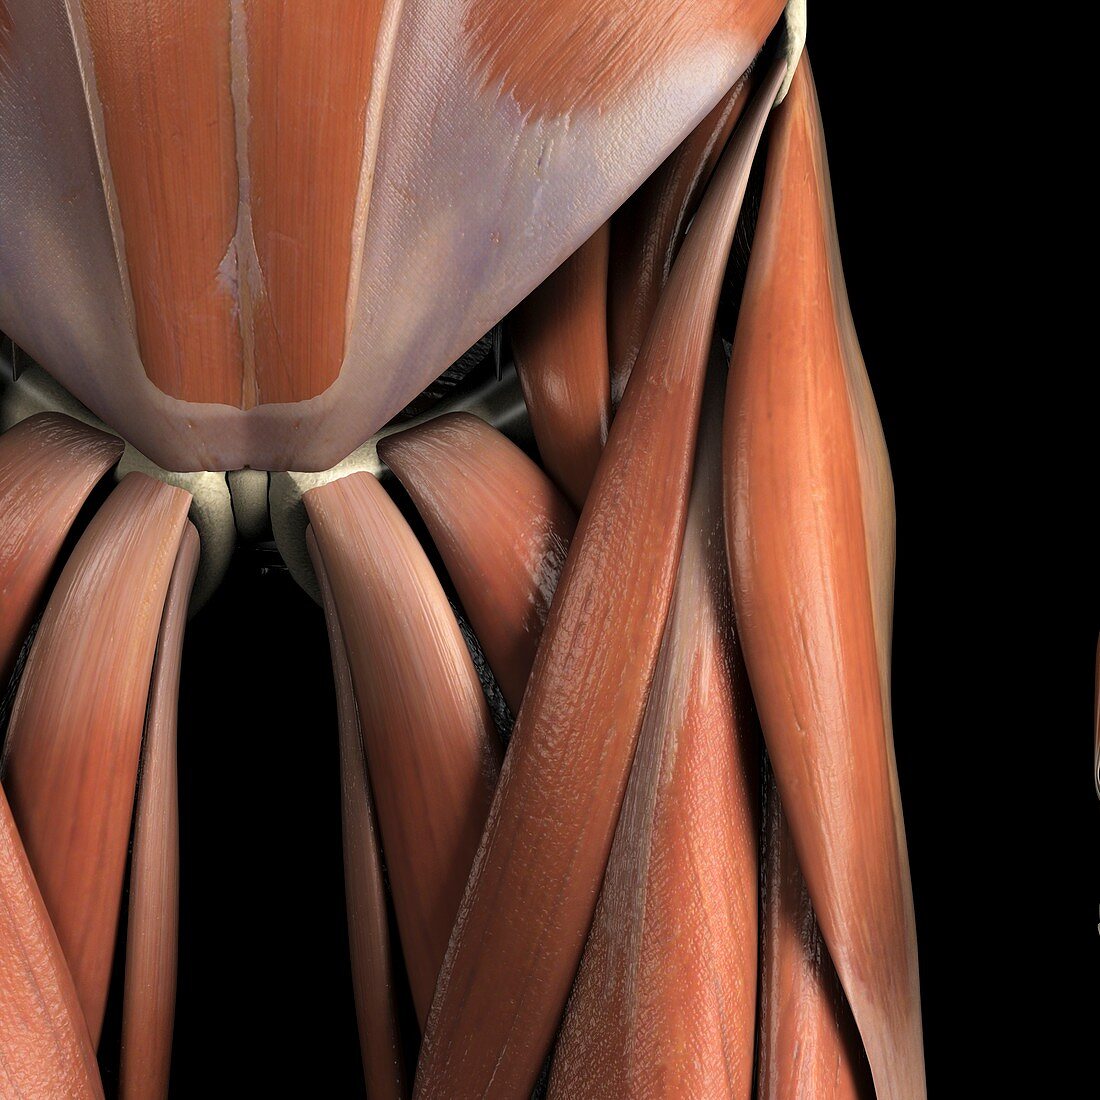 Muscles of the Groin, artwork